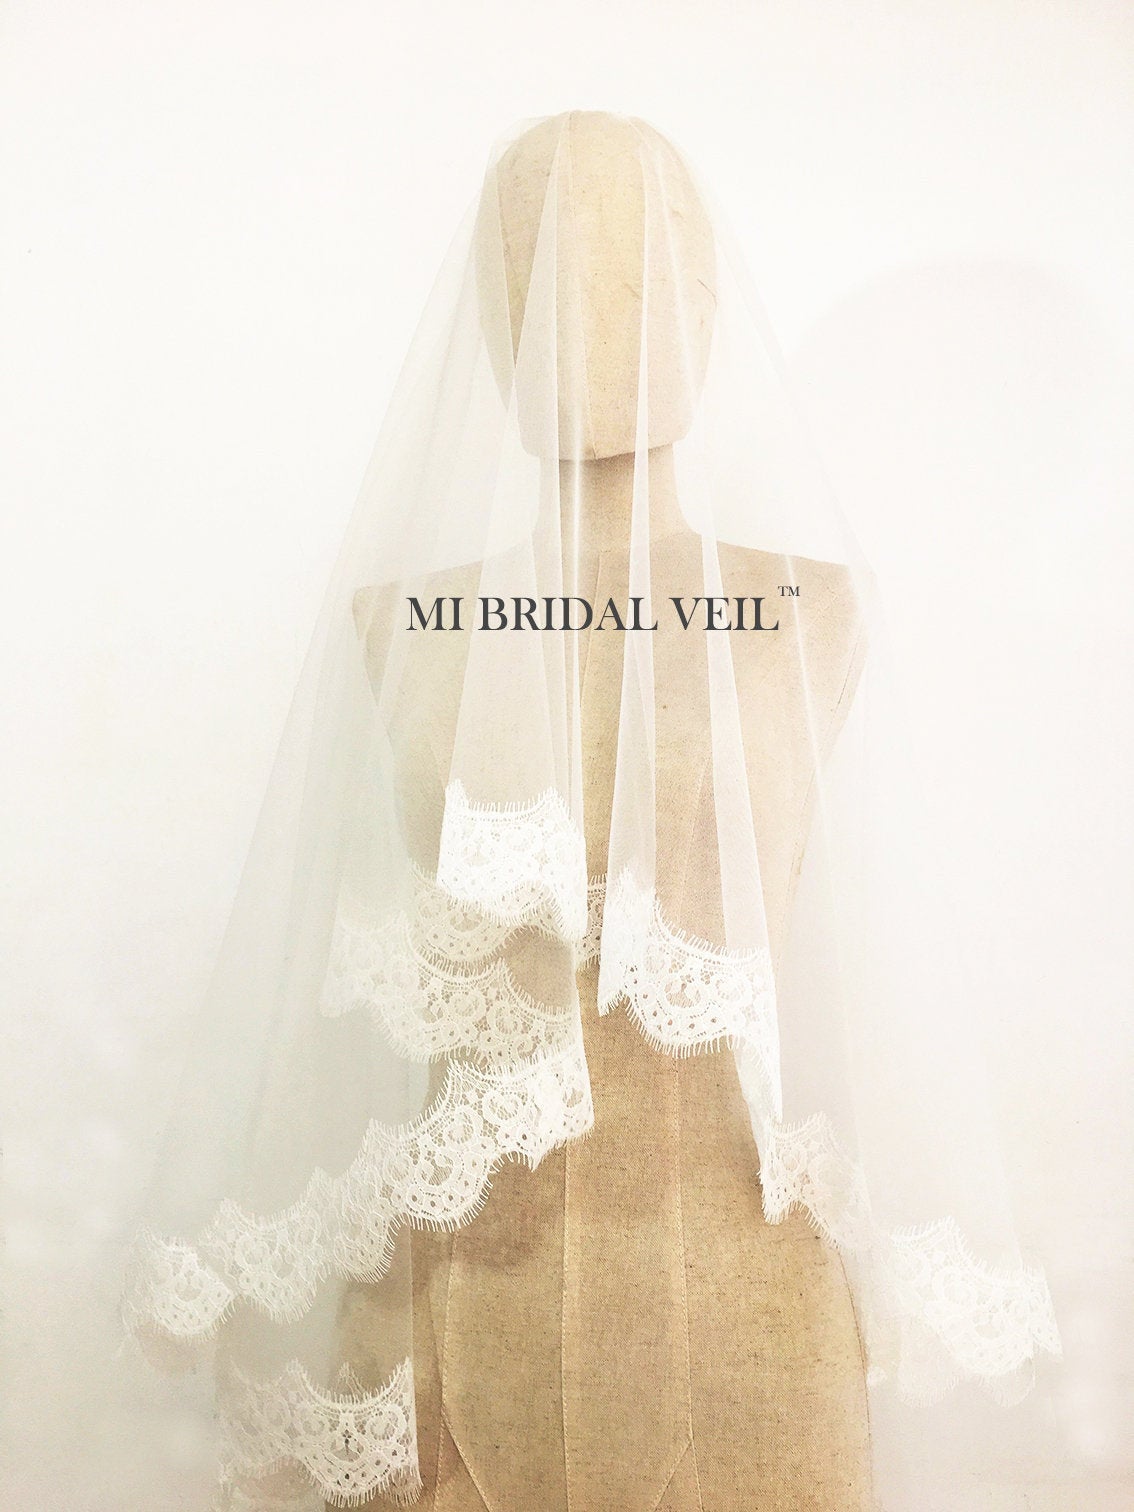 Mantilla lace veil in Cathedral length with beaded lace edge design,  Spanish Wedding veil, Ivory bridal veil, Irene